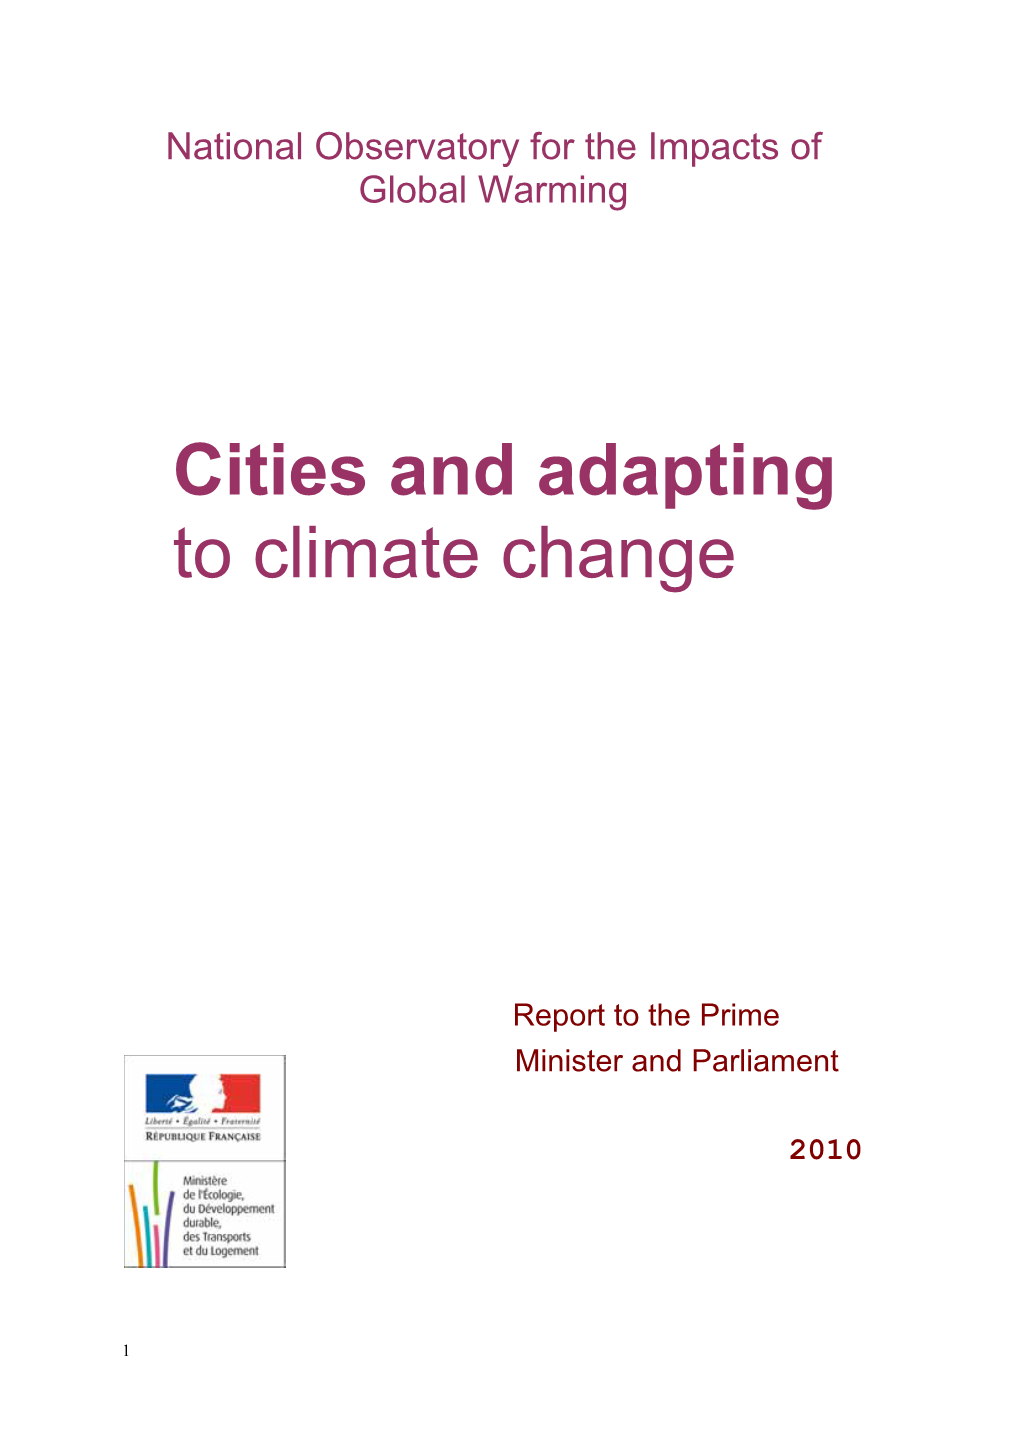 Cities and Adapting to Climate Change